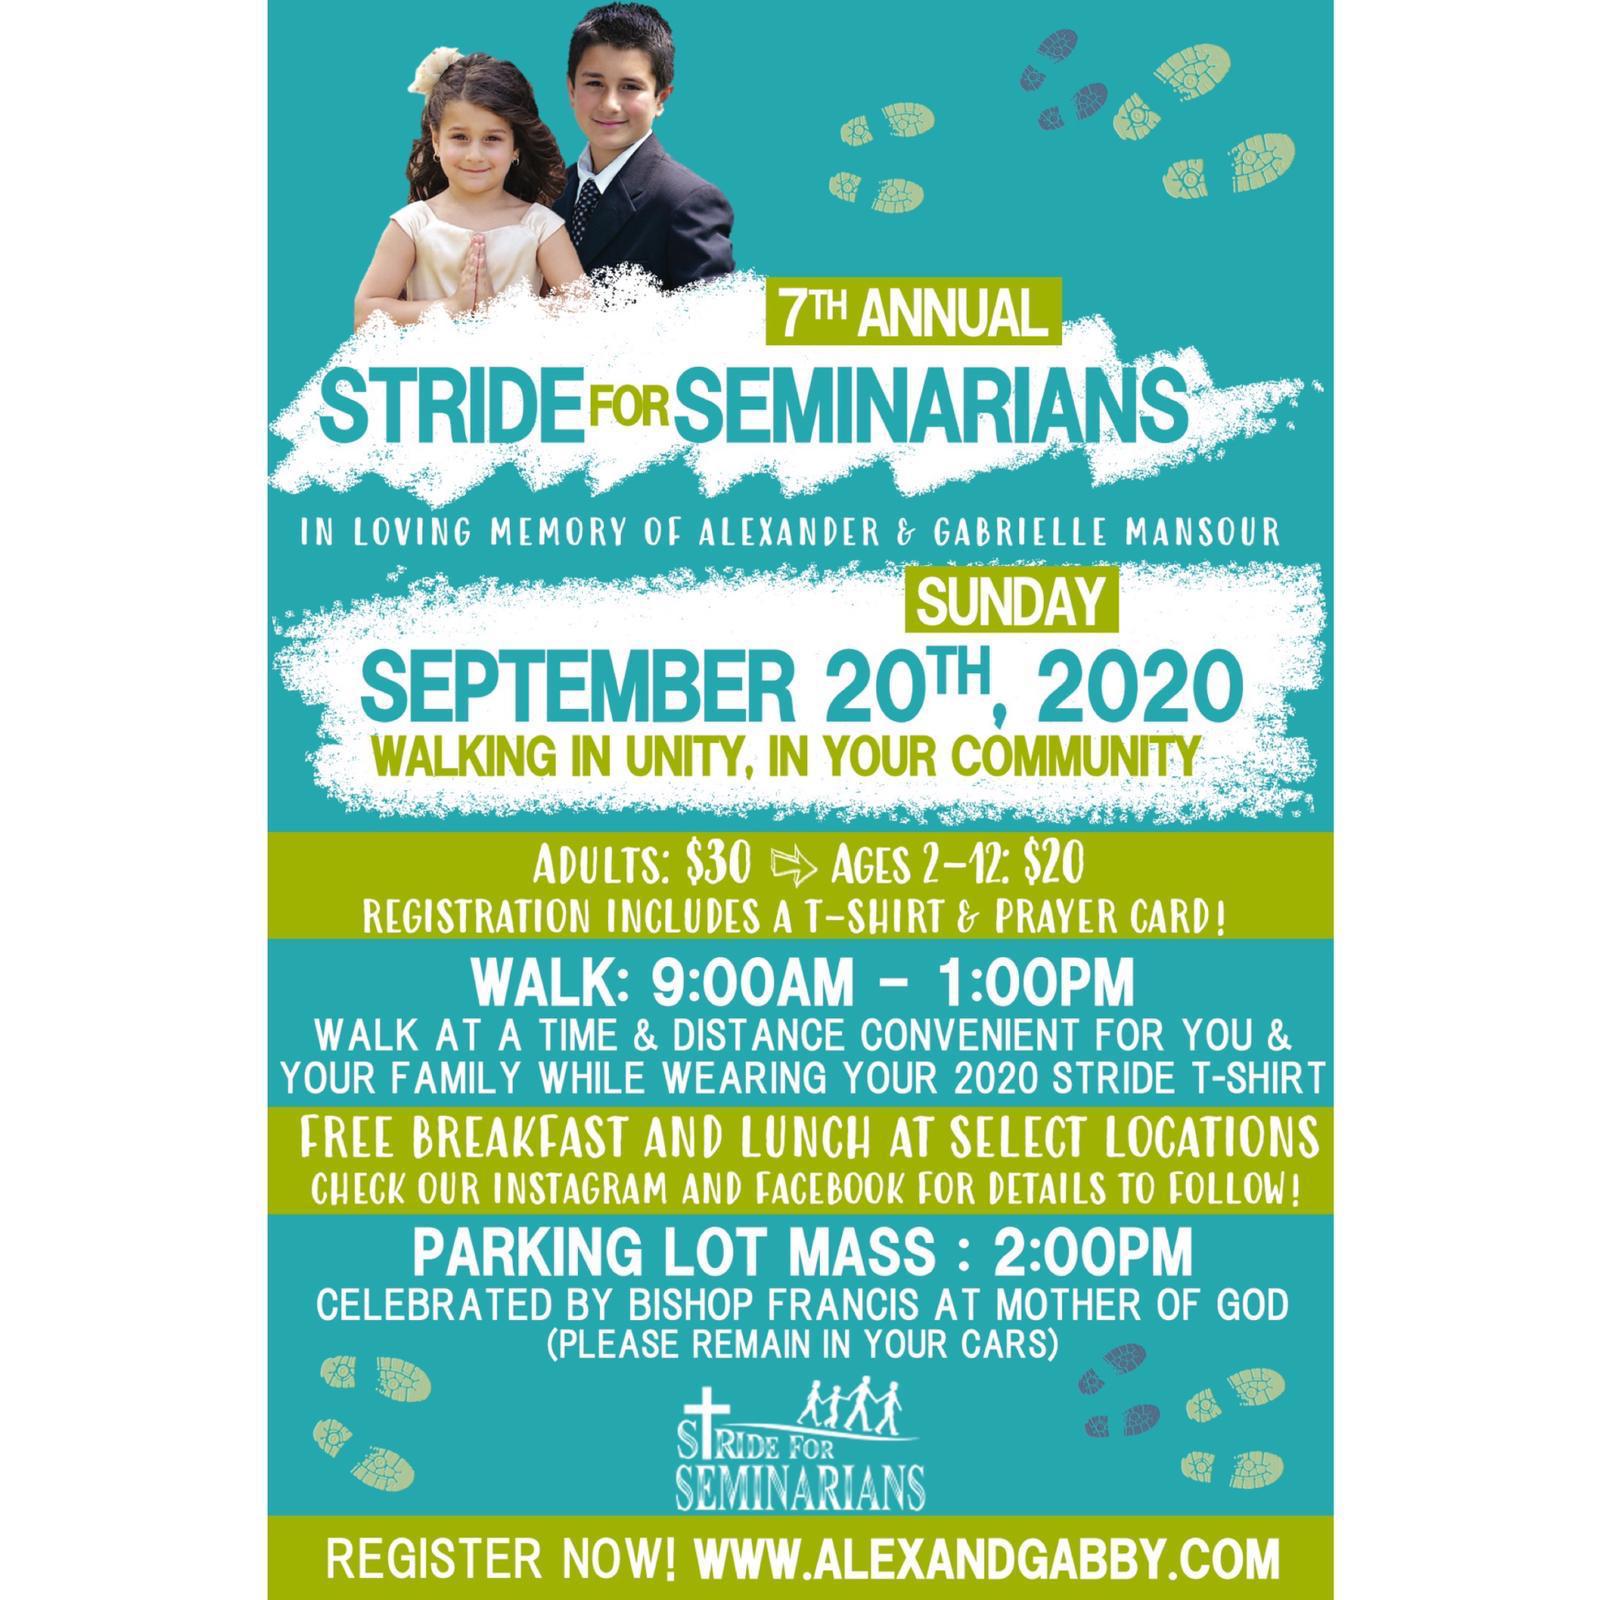 2020-stride-for-seminarians-chaldean-diocese-of-st-thomas-the